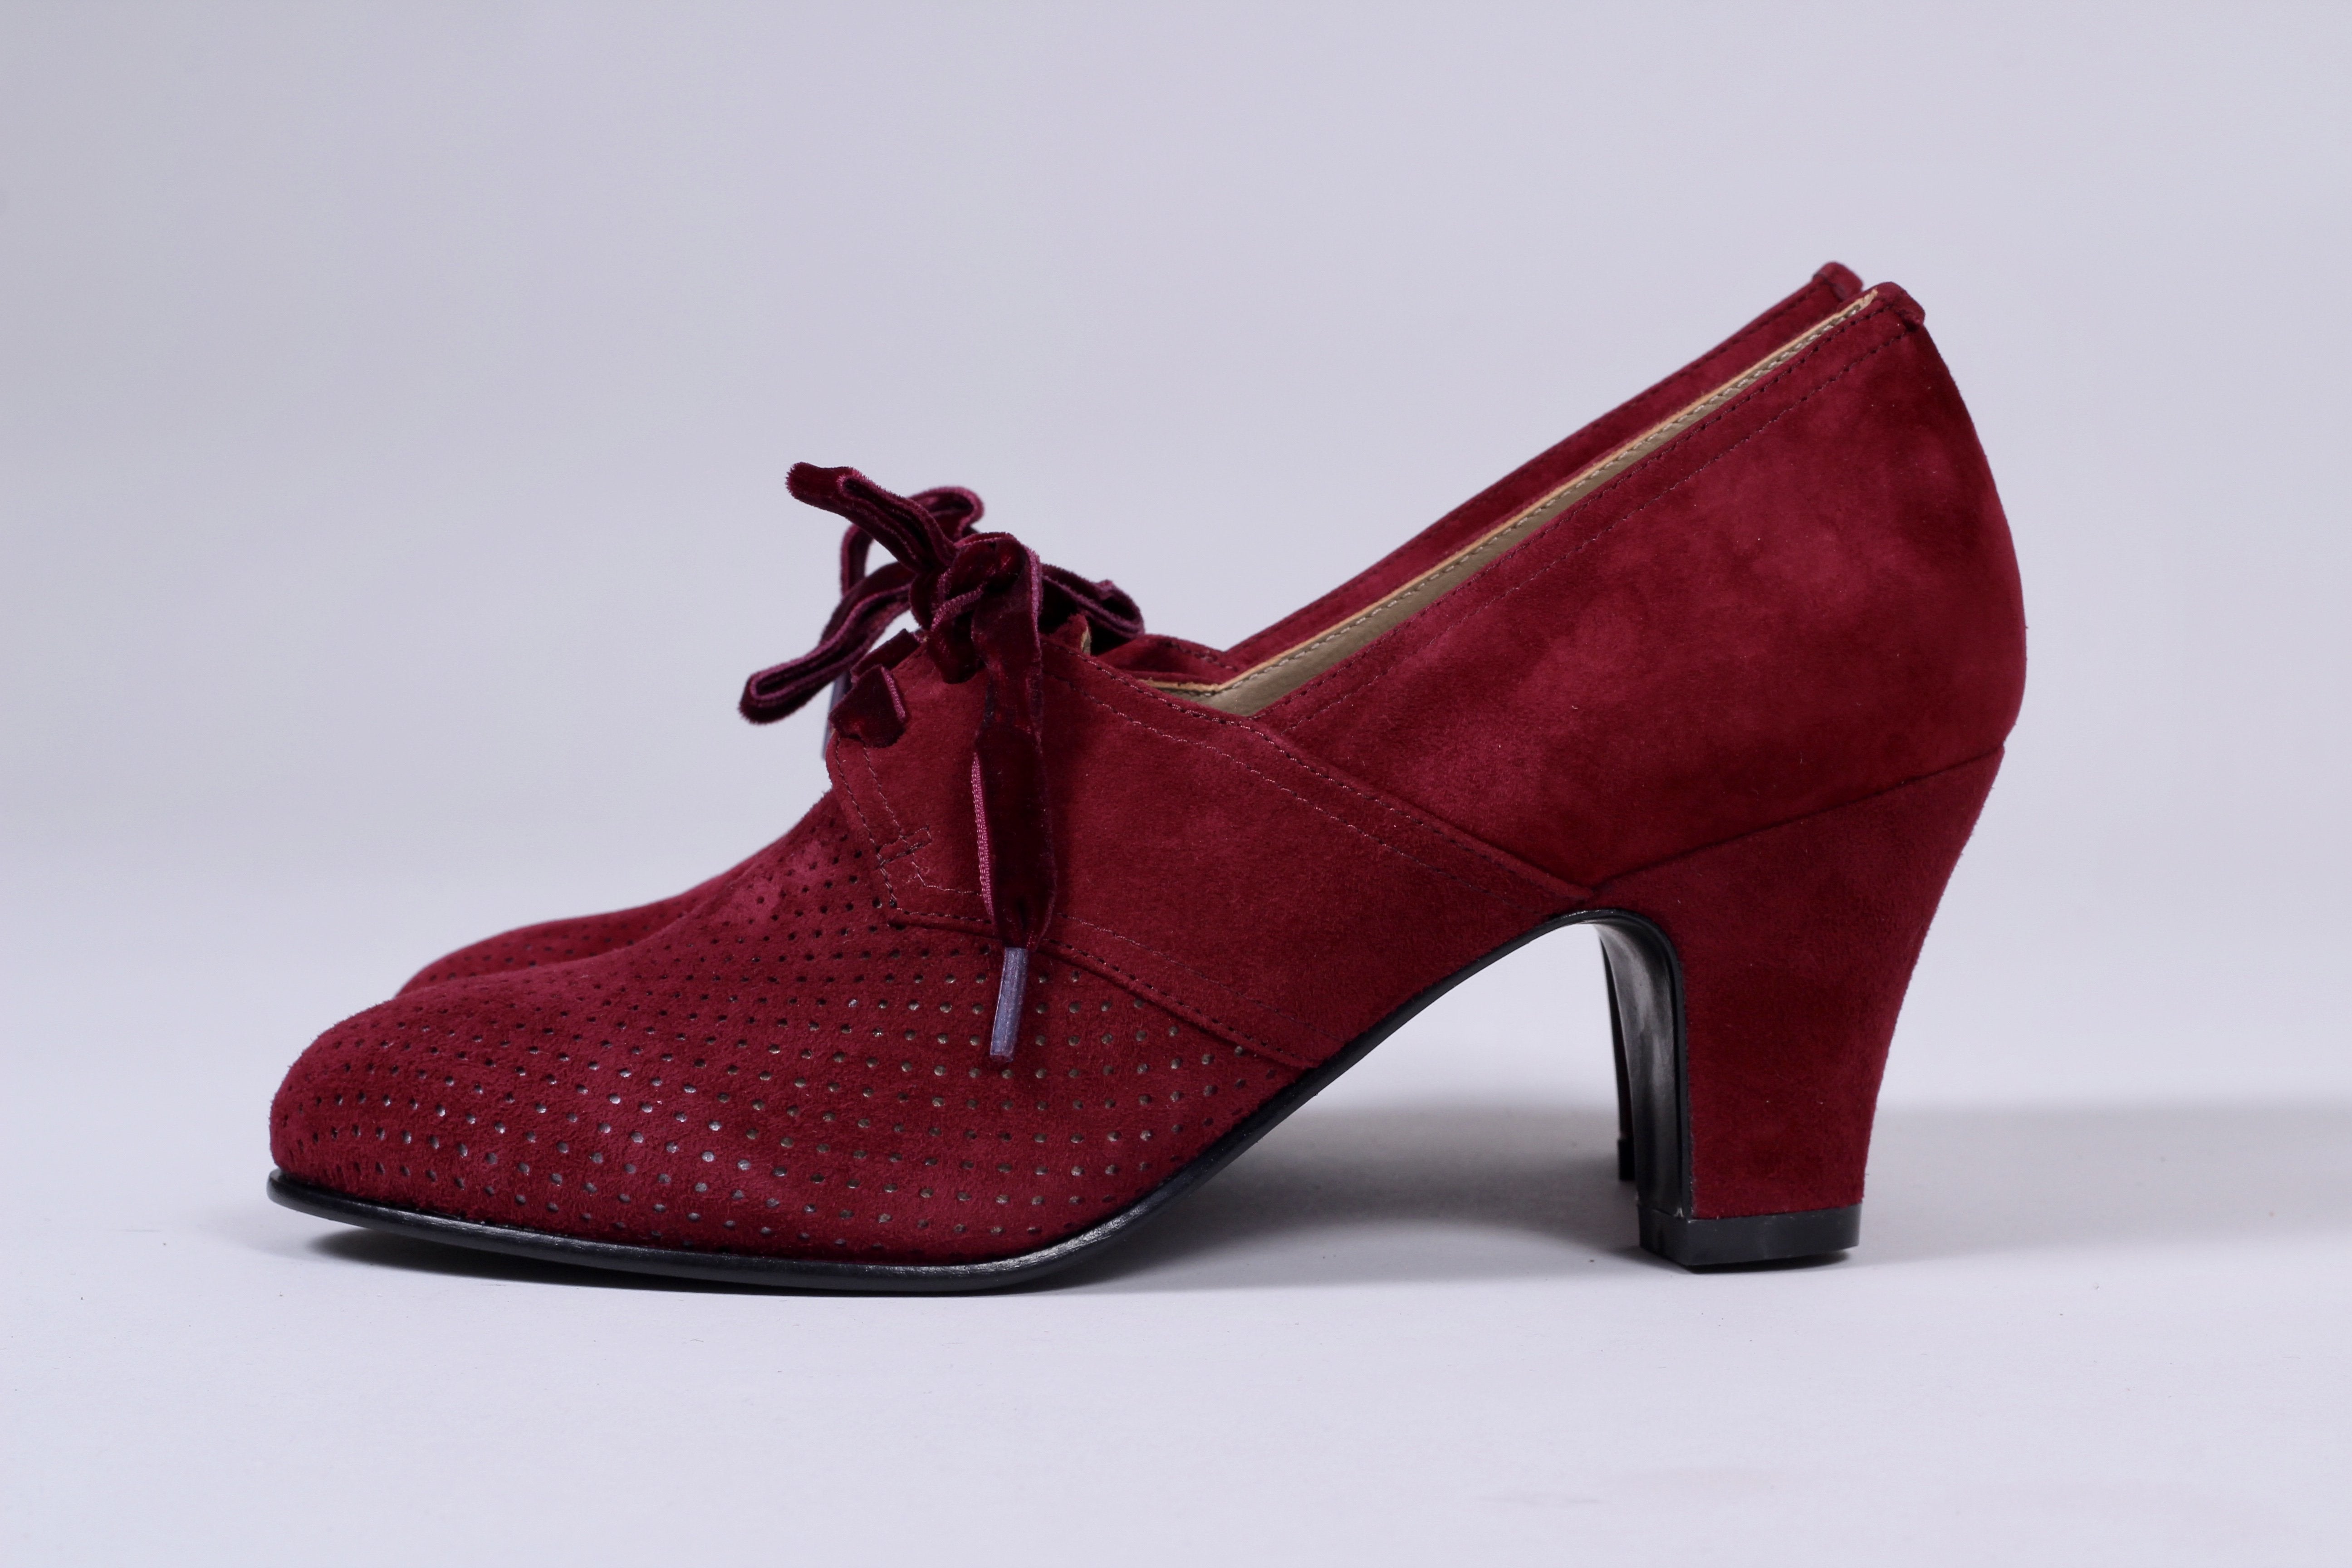 40's vintage style pumps in suede with lace - Red - Esther